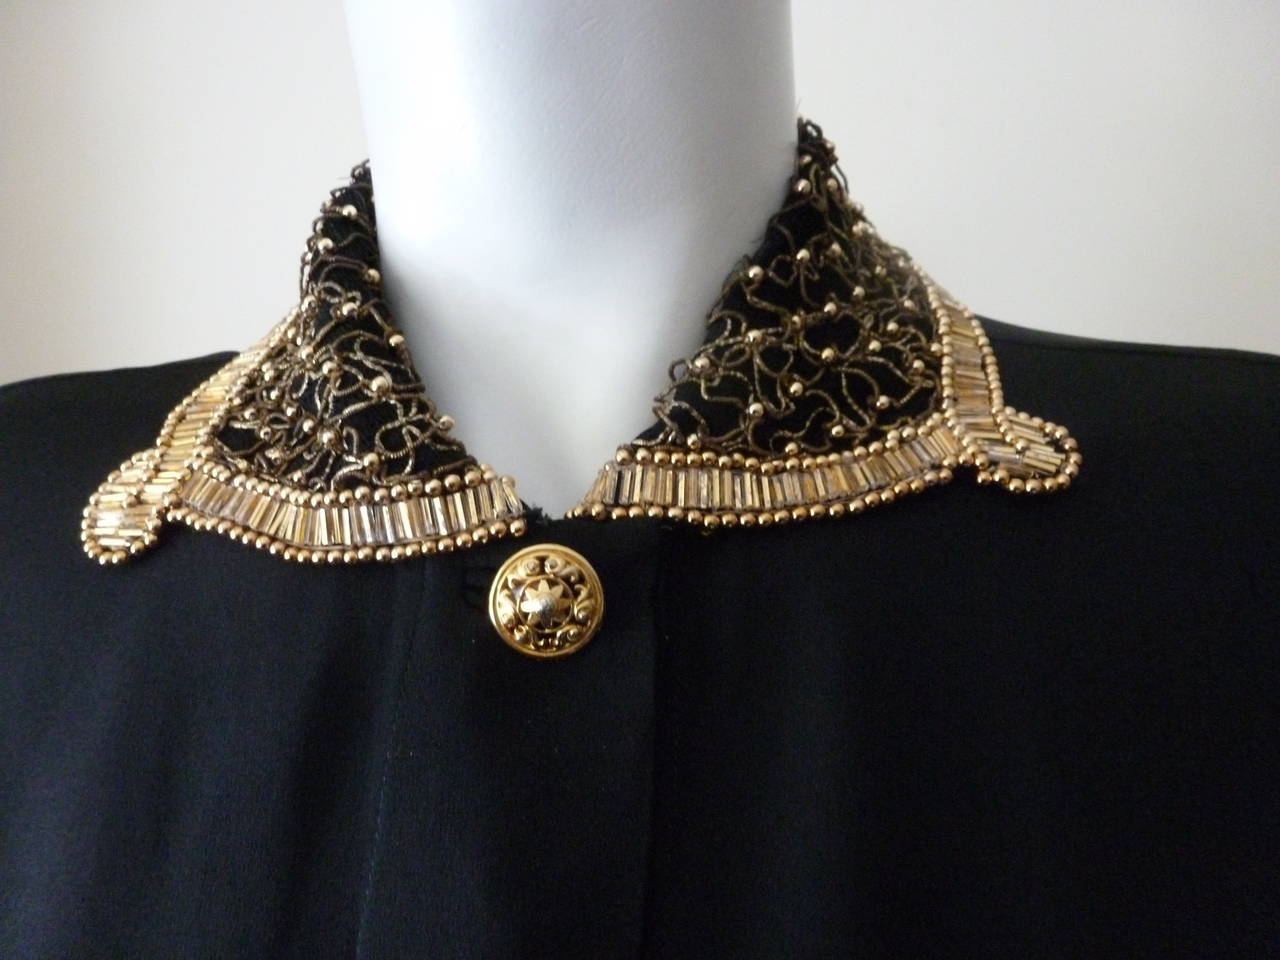 A beautiful Gianni Versace Couture black silk beaded and embroidered sleeveless evening blouse from the Fall 1992 Bondage collection. The collar is embroidered with gilt purl thread and is punctuated with gold-tone metal studs.

Marked an Italian